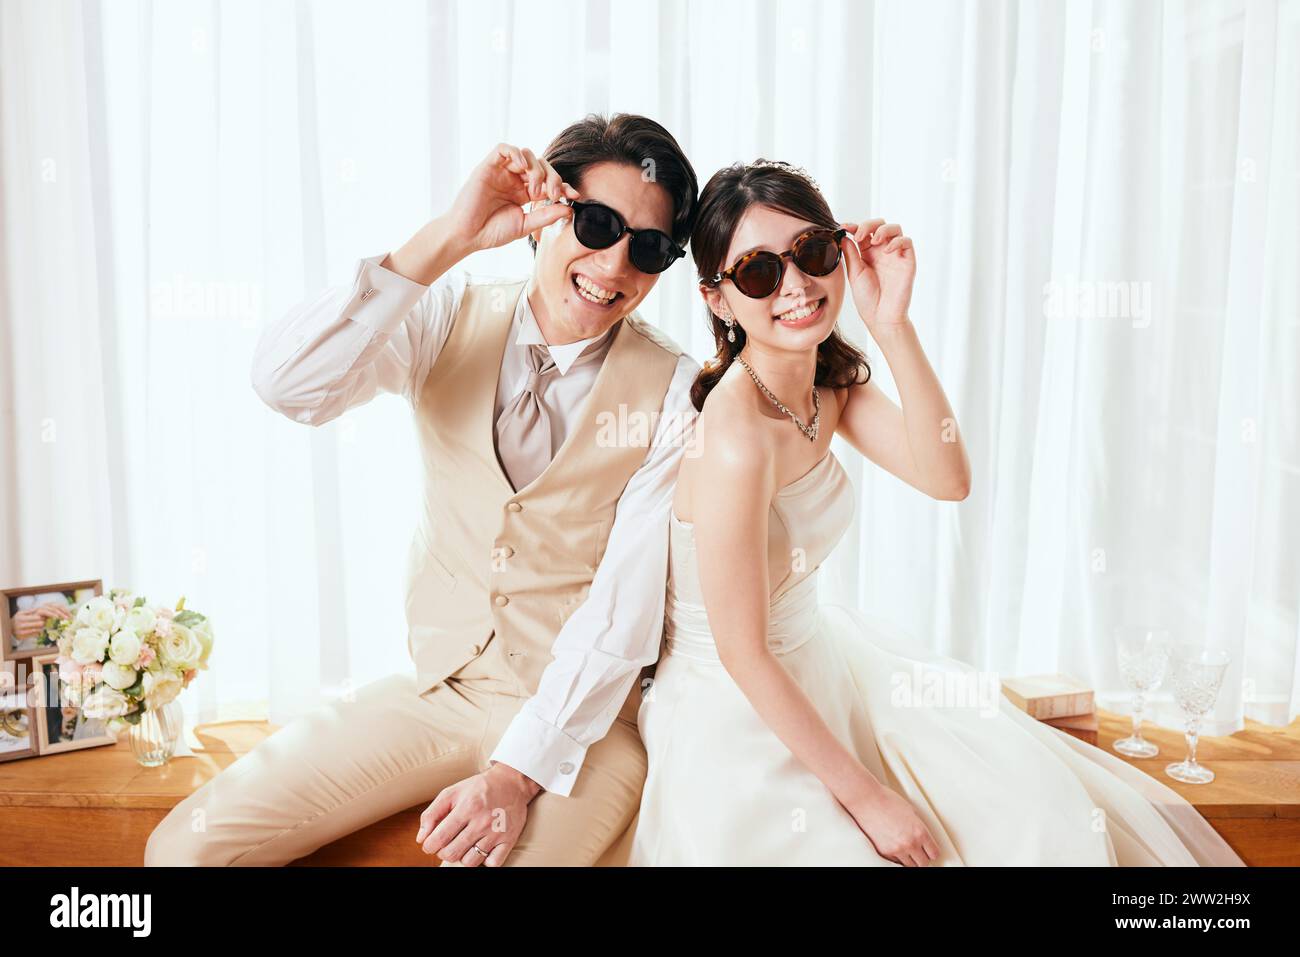 A bride and groom in sunglasses posing for the camera Stock Photo